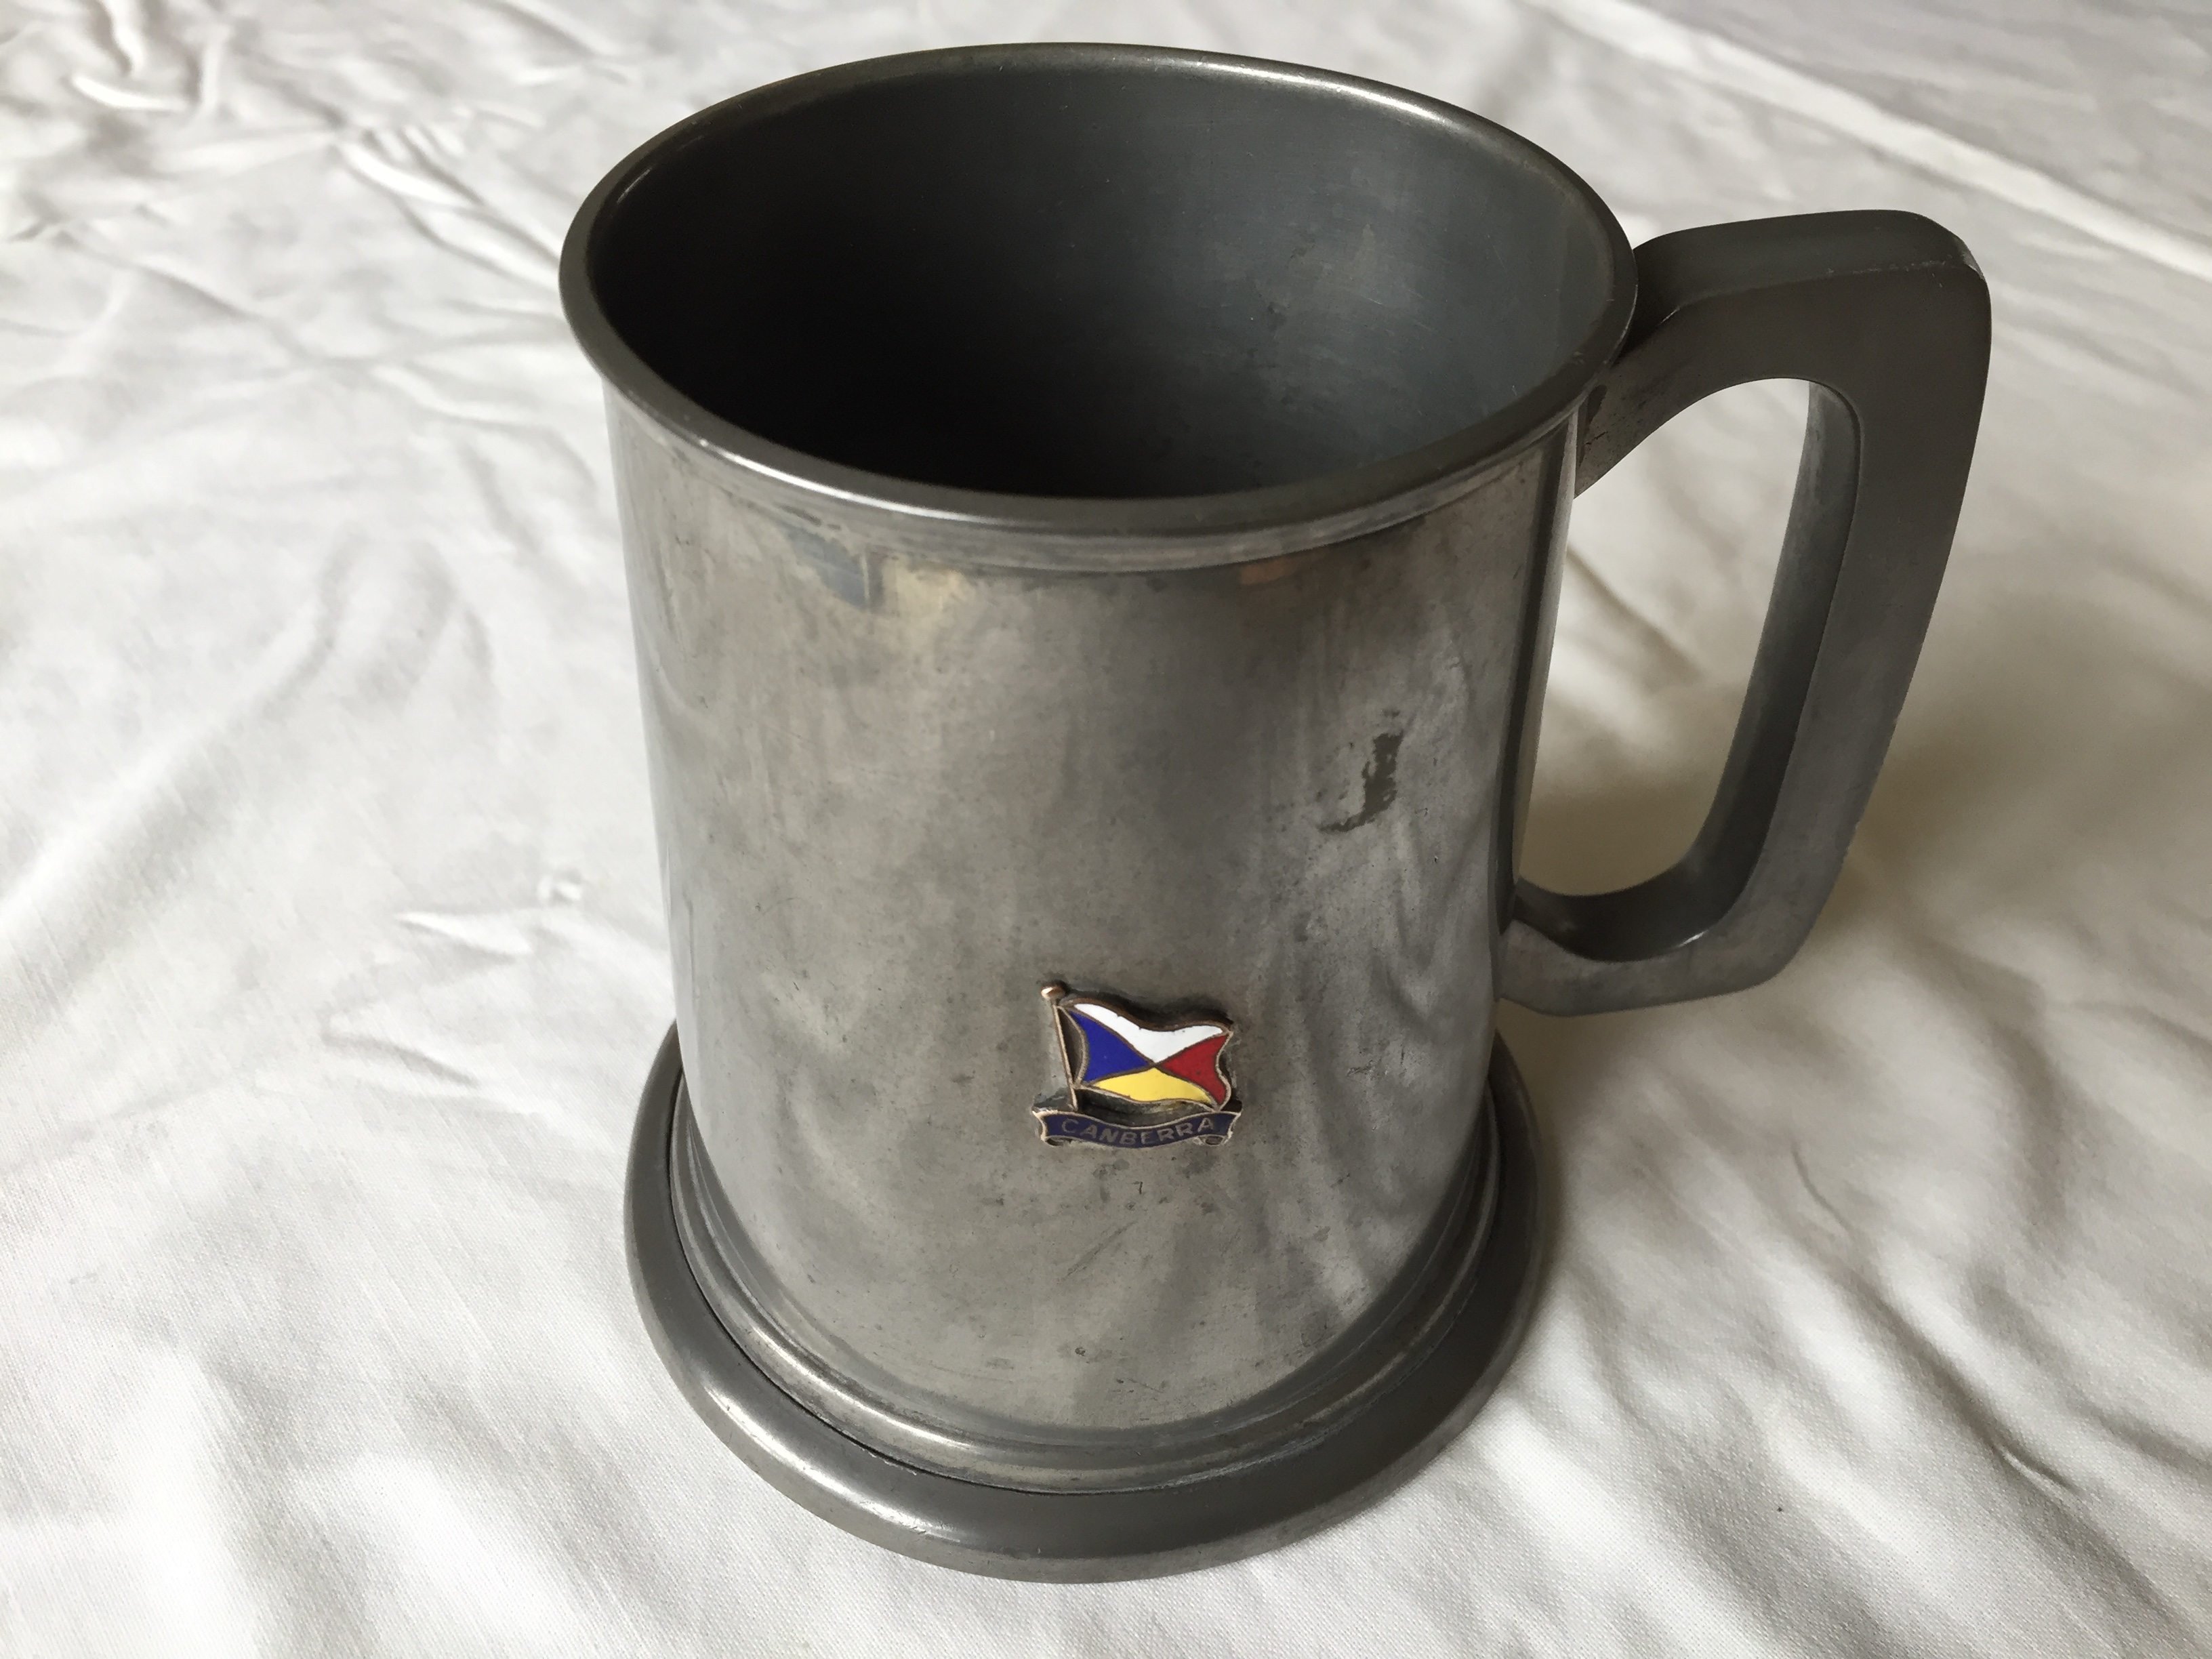 SOUVENIR TANKARD FROM THE P&O LINE VESSEL THE SS CANBERRA